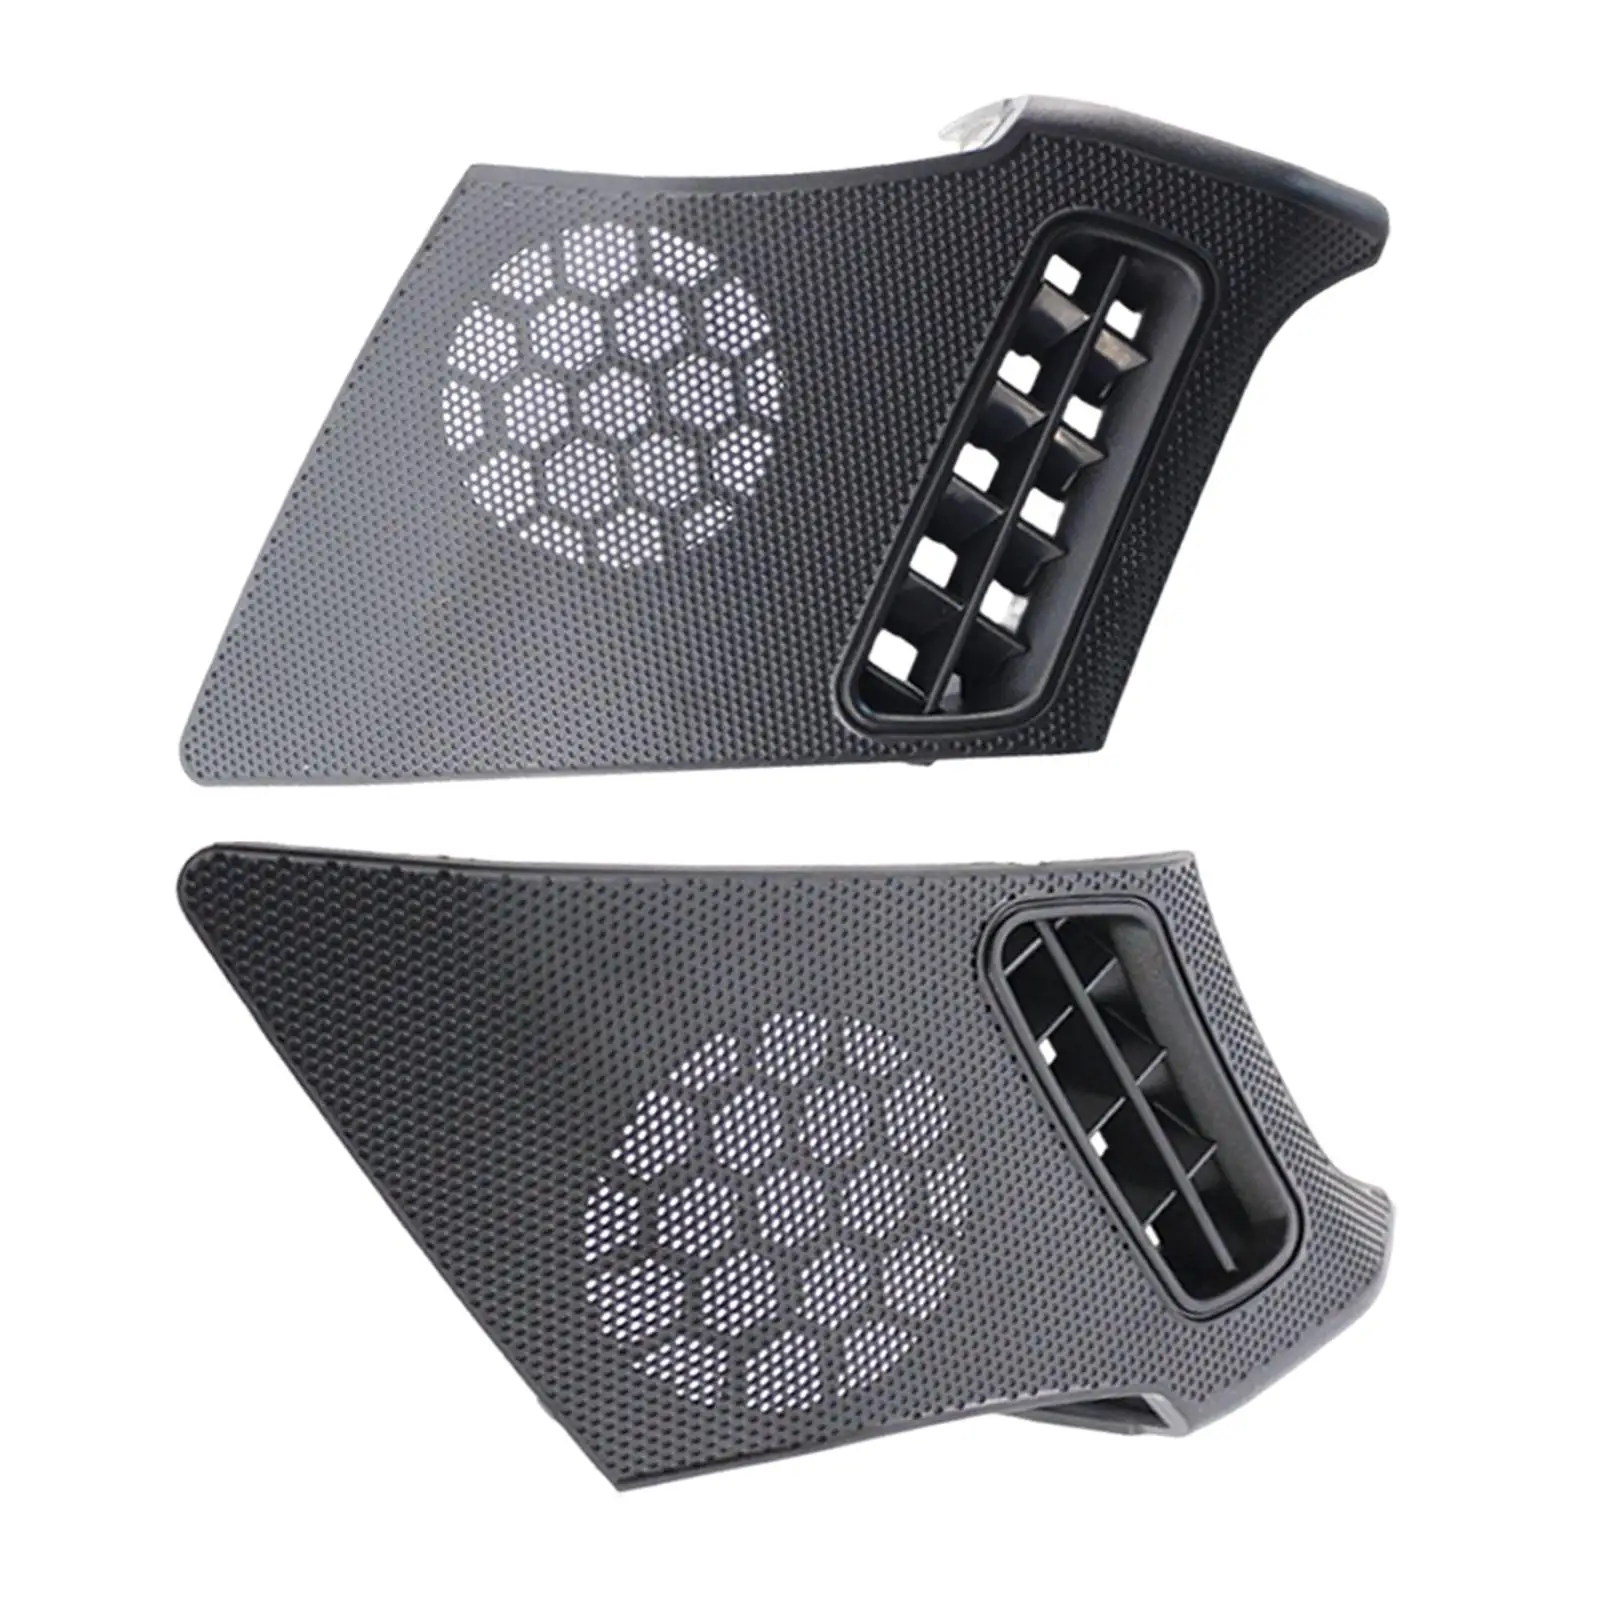 Speaker Grill Covers Protective Durable Parts Fits for car W210